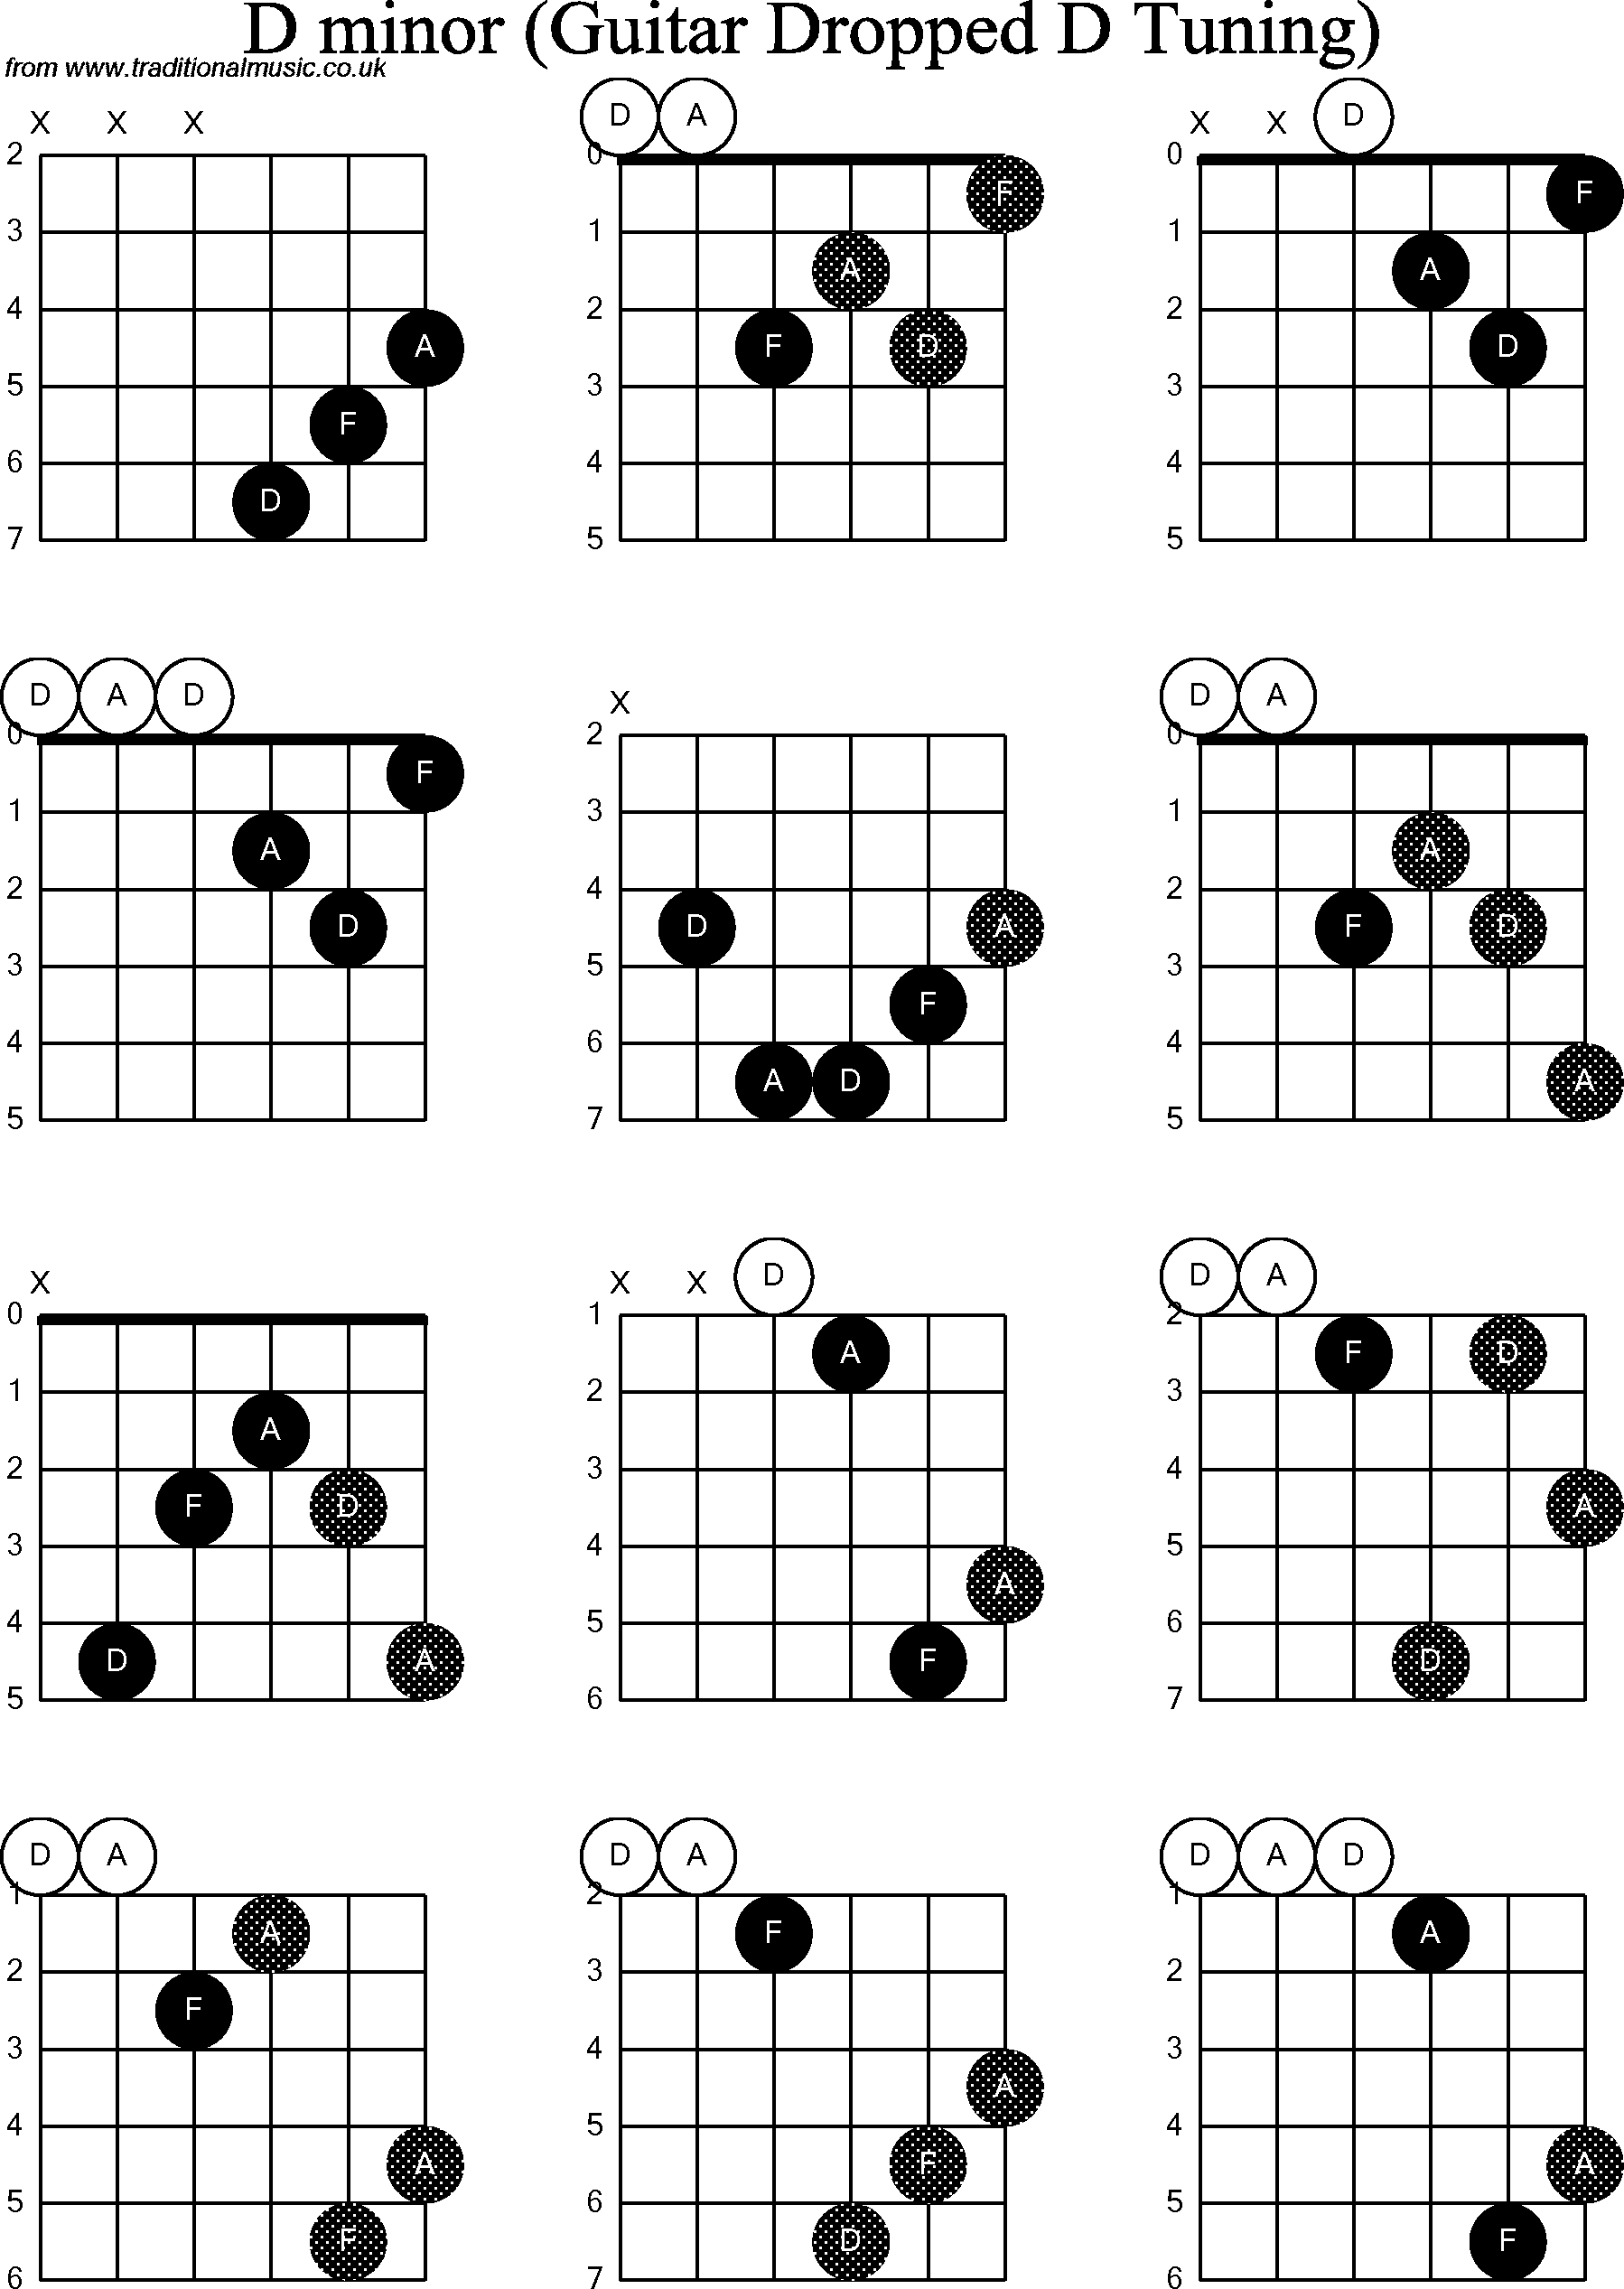 Chord diagrams for Dropped D Guitar(DADGBE), G